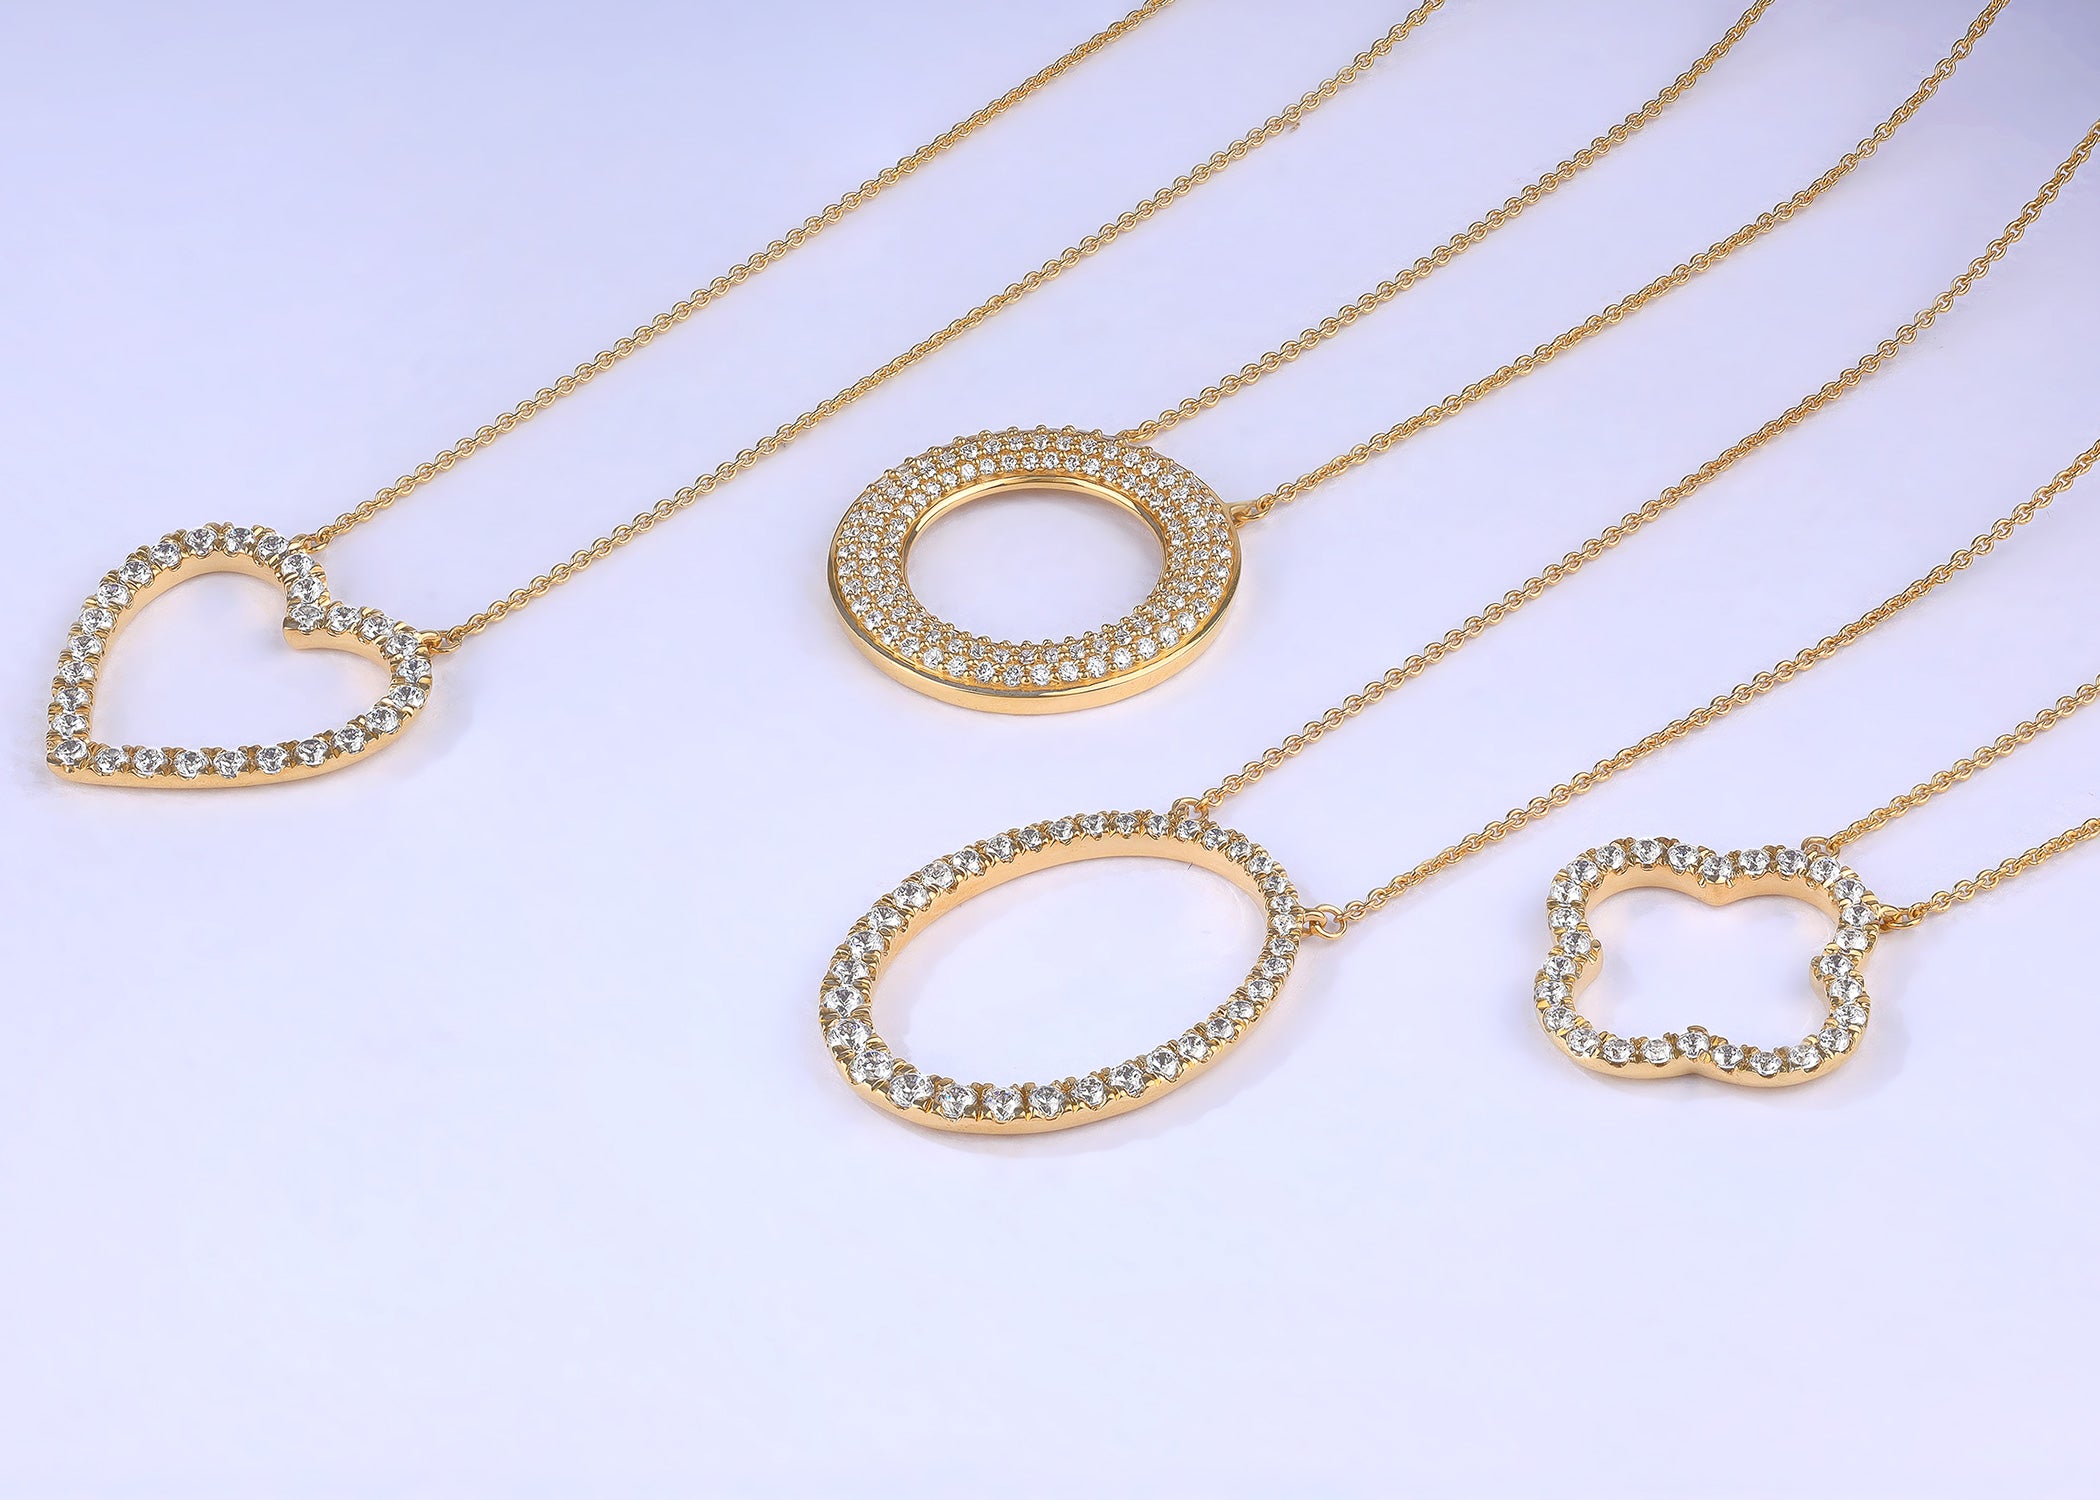 Tapering Ellipse Silhouette Necklace - Necklace 